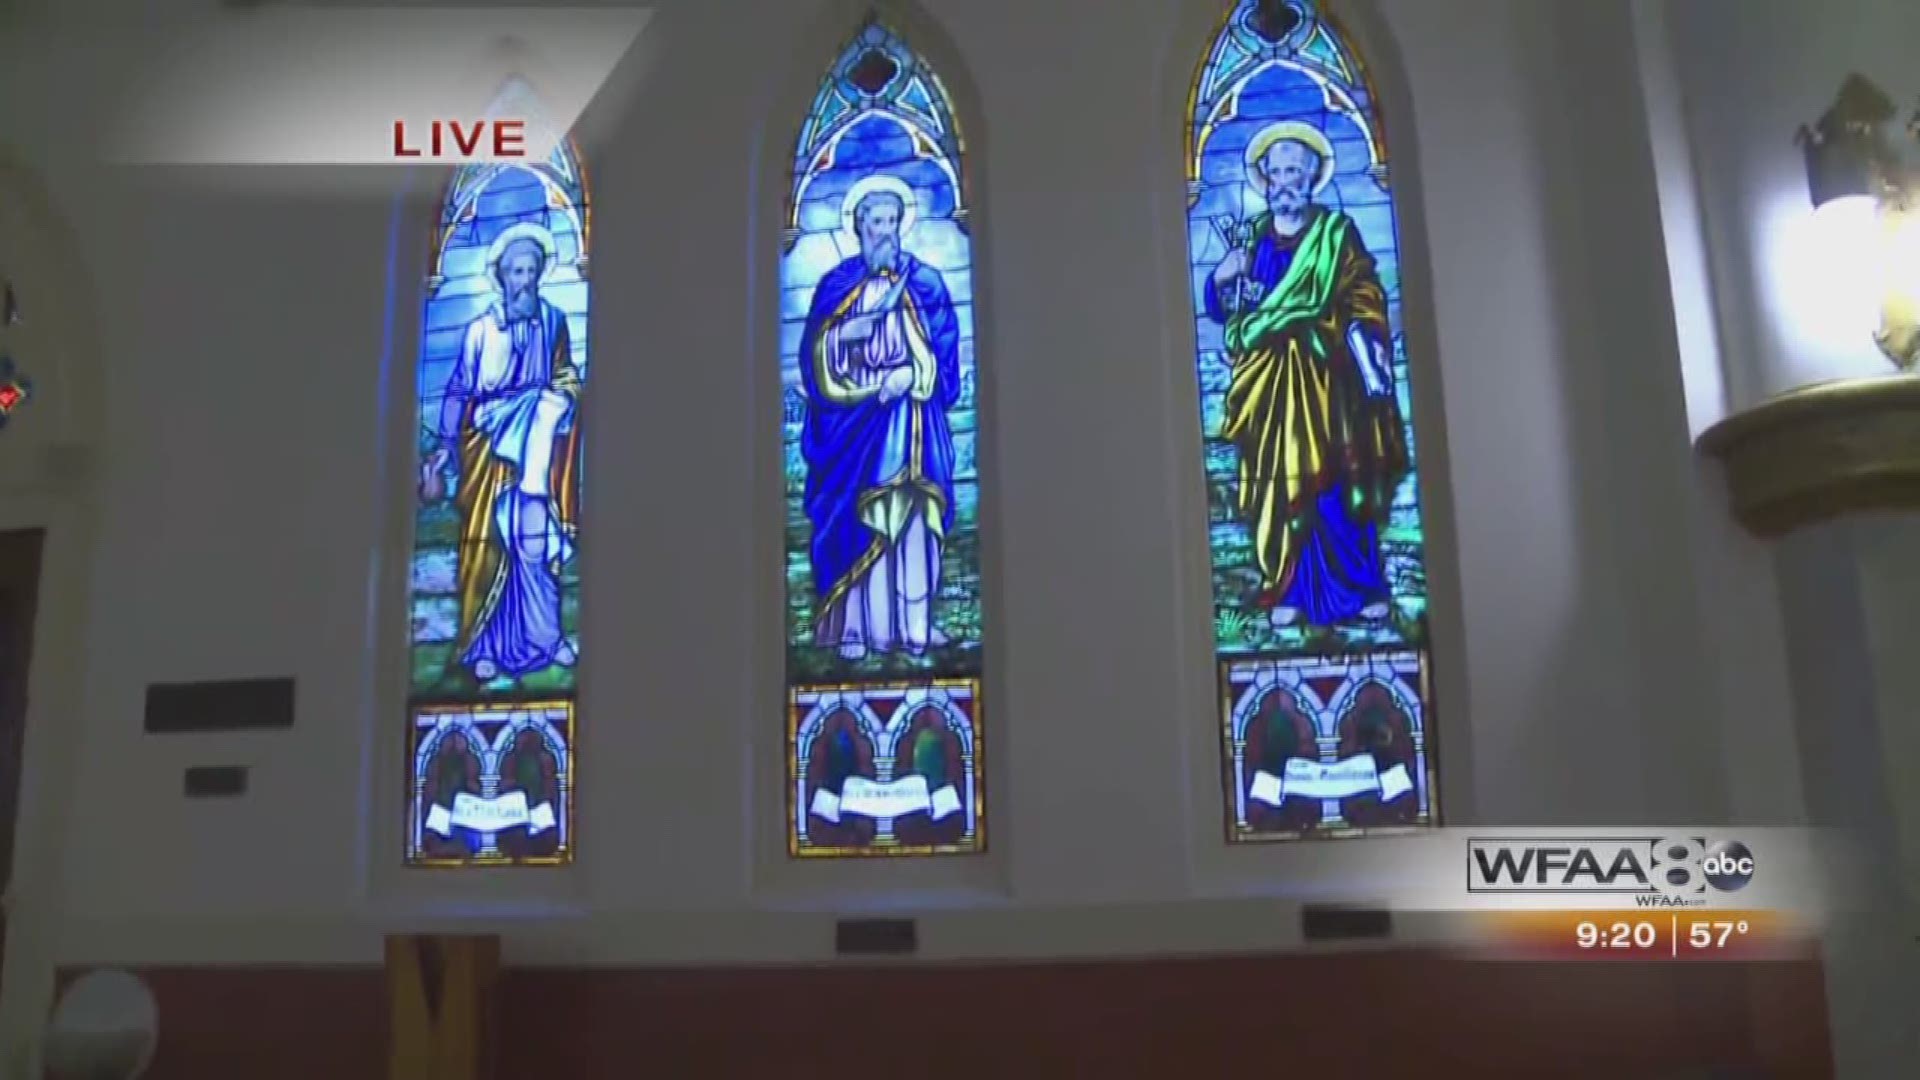 It's called the "Mother Church" in downtown Dallas. Paige McCoy Smith takes us inside the Cathedral Shrine of the Virgin of Guadalupe.